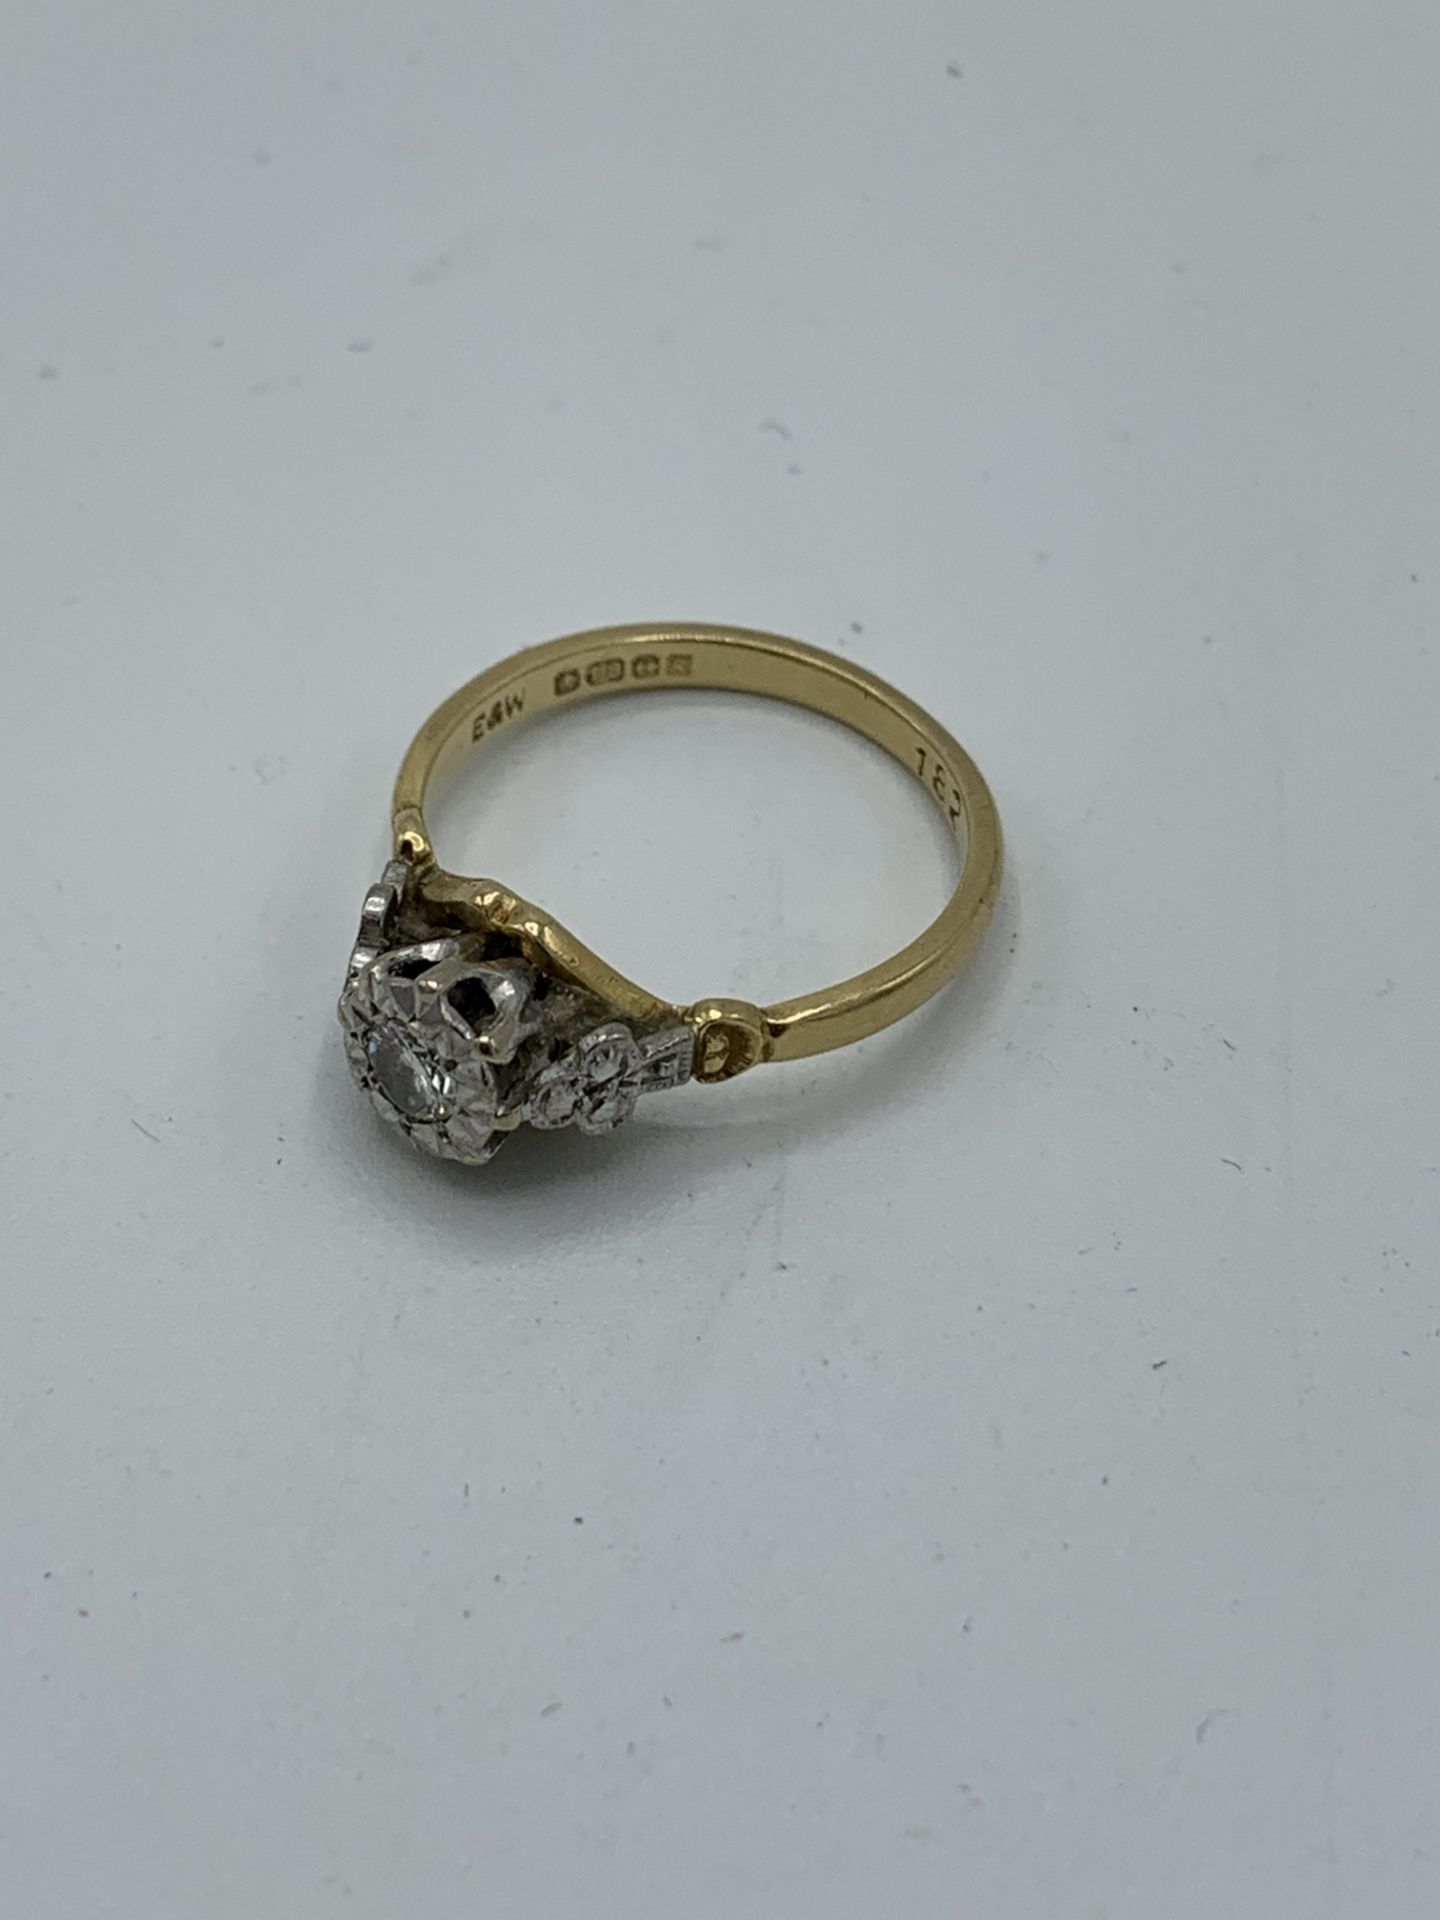 18ct gold solitaire diamond ring, size J, weight 2.6gms. Estimate £150-180. - Image 2 of 2